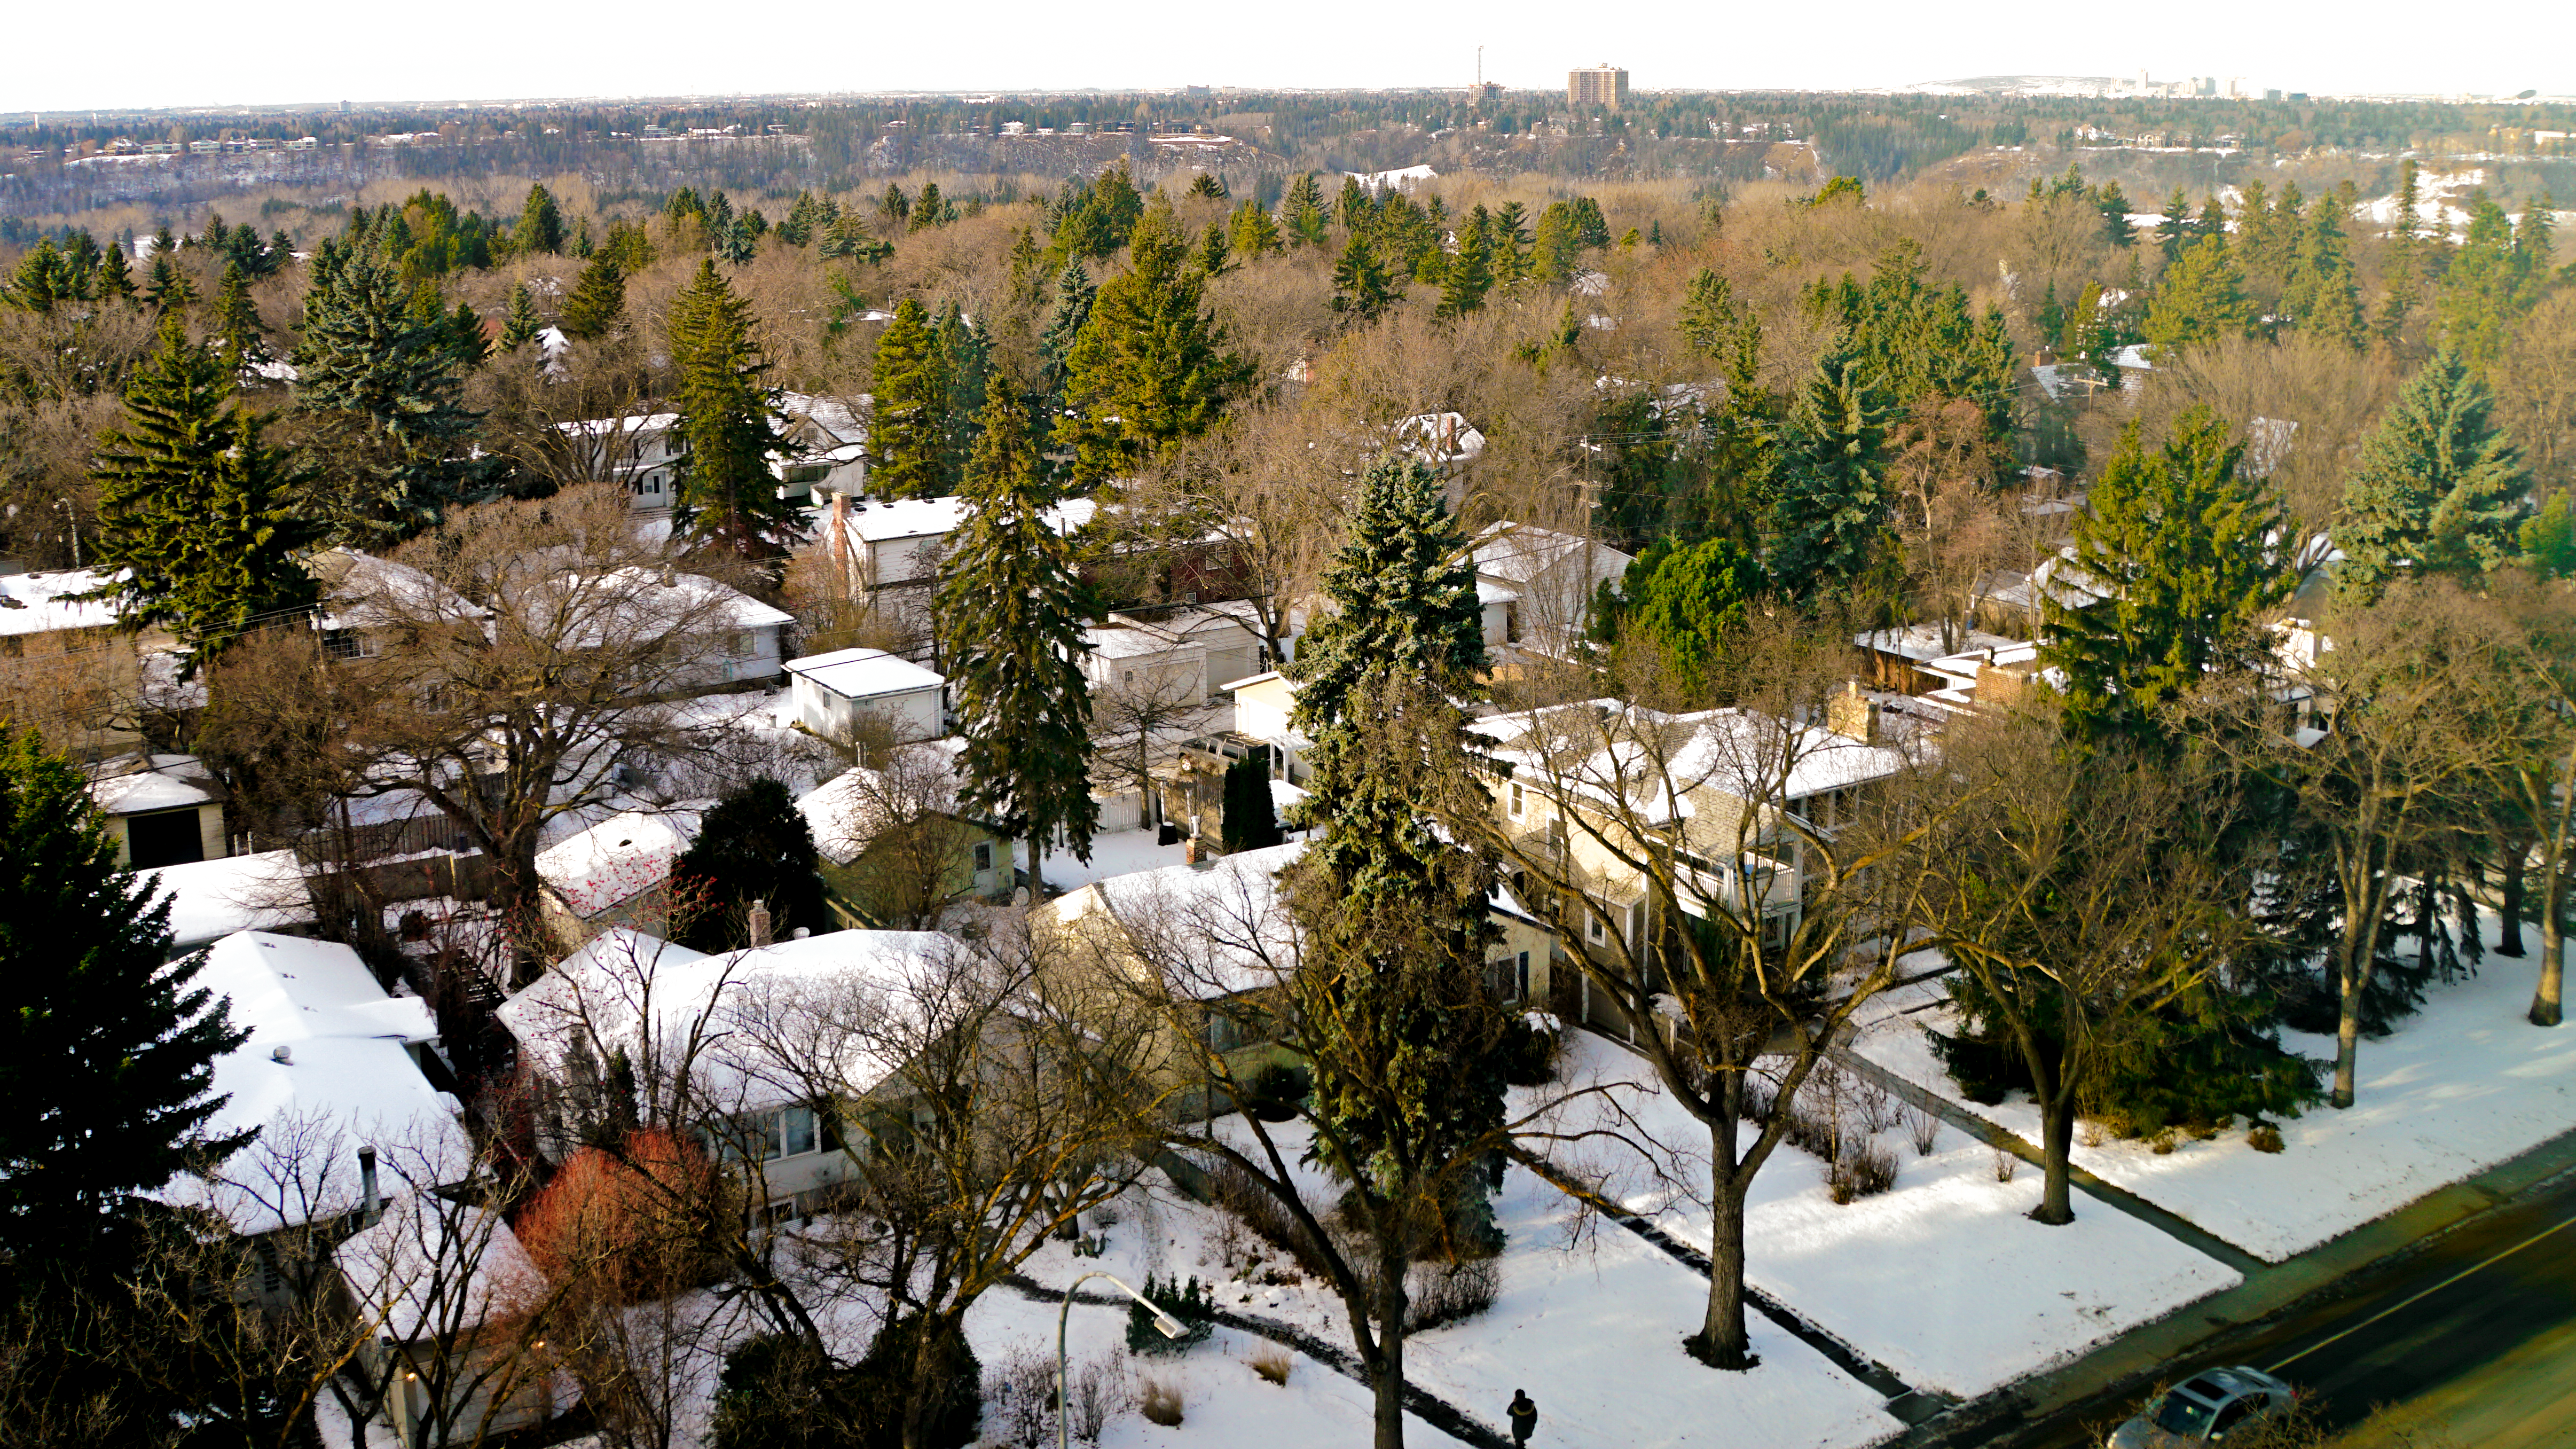 A community in Edmonton, with snow cover